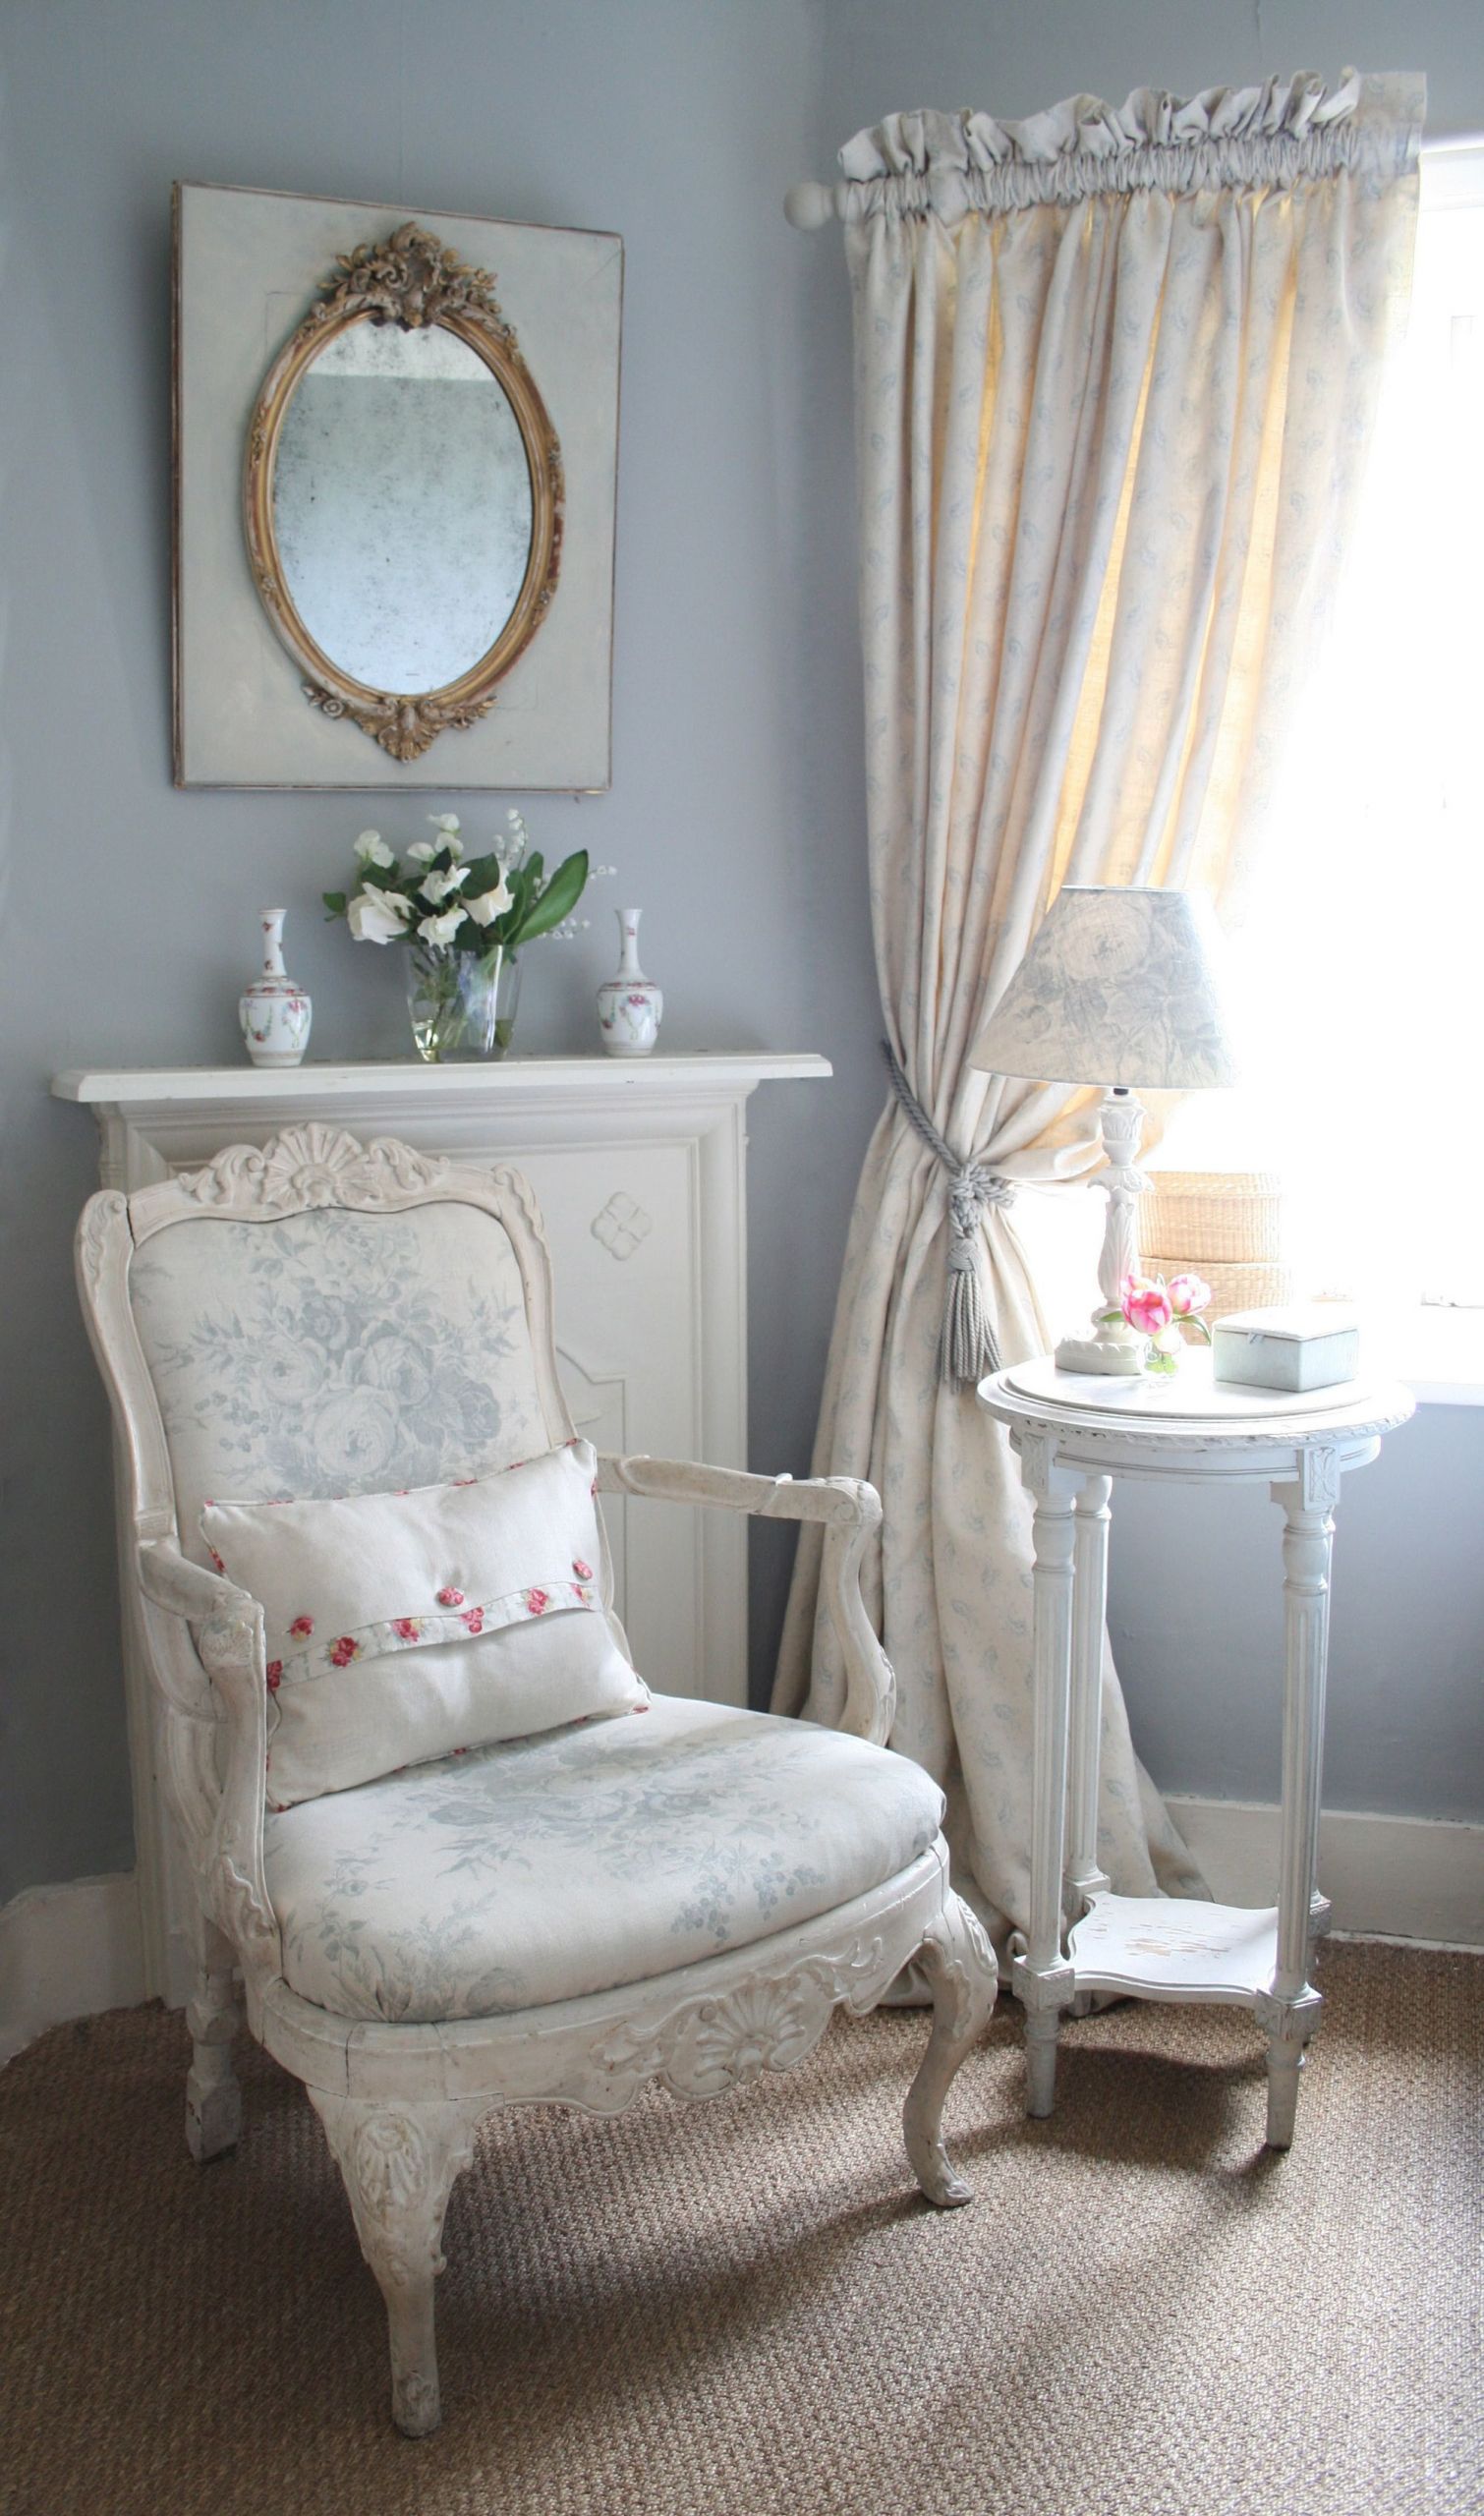 Shabby Chic Bedroom Chair
 smokey blue grey with creamy chair in pretty floral note